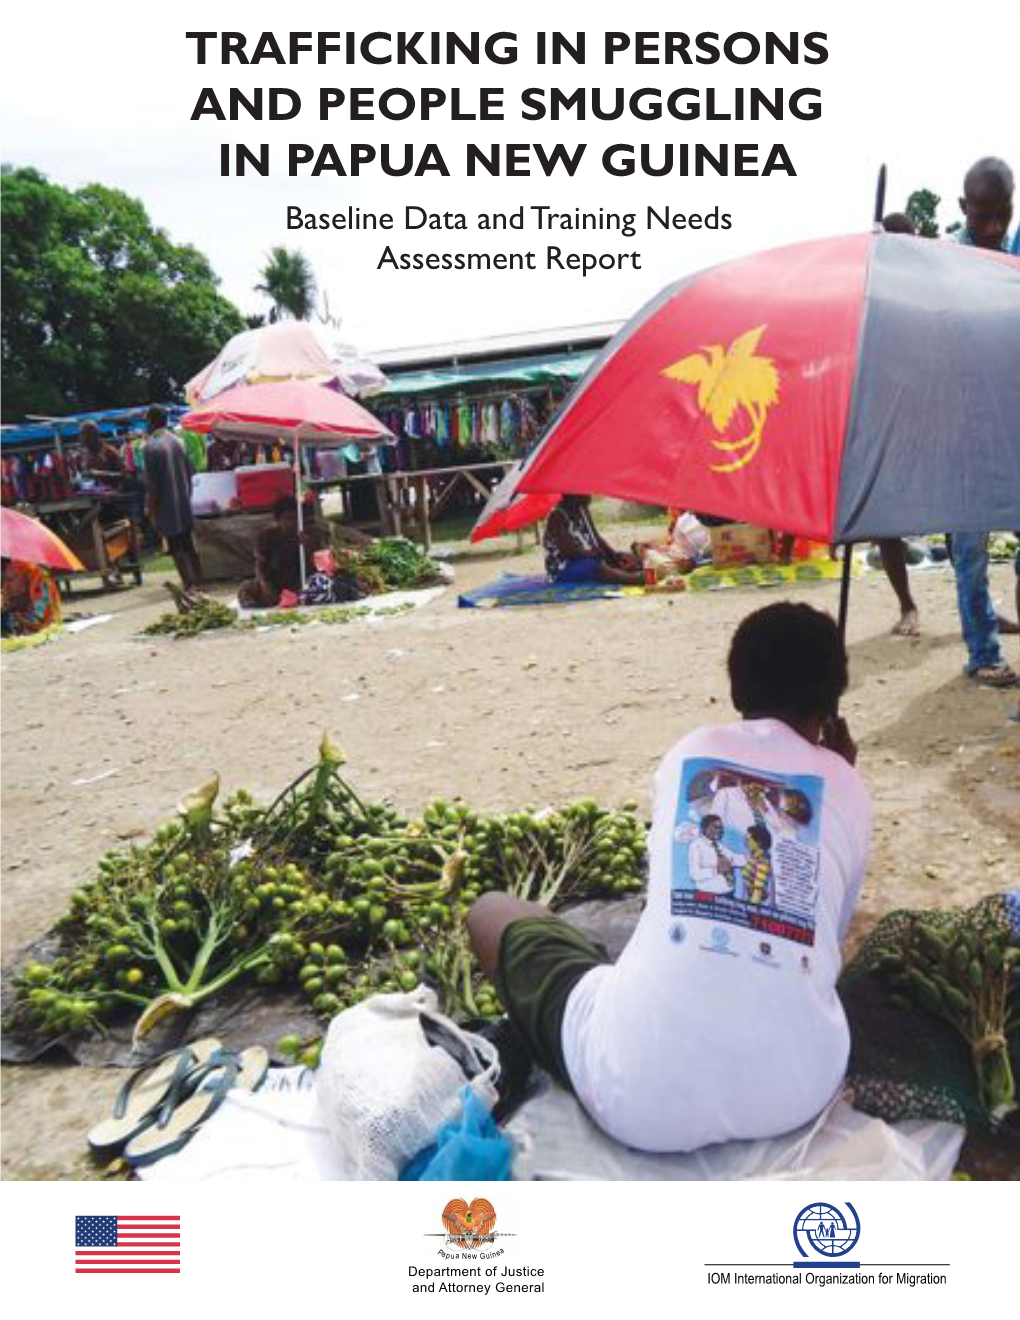 TRAFFICKING in PERSONS and PEOPLE SMUGGLING in PAPUA NEW GUINEA Baseline Data and Training Needs Assessment Report